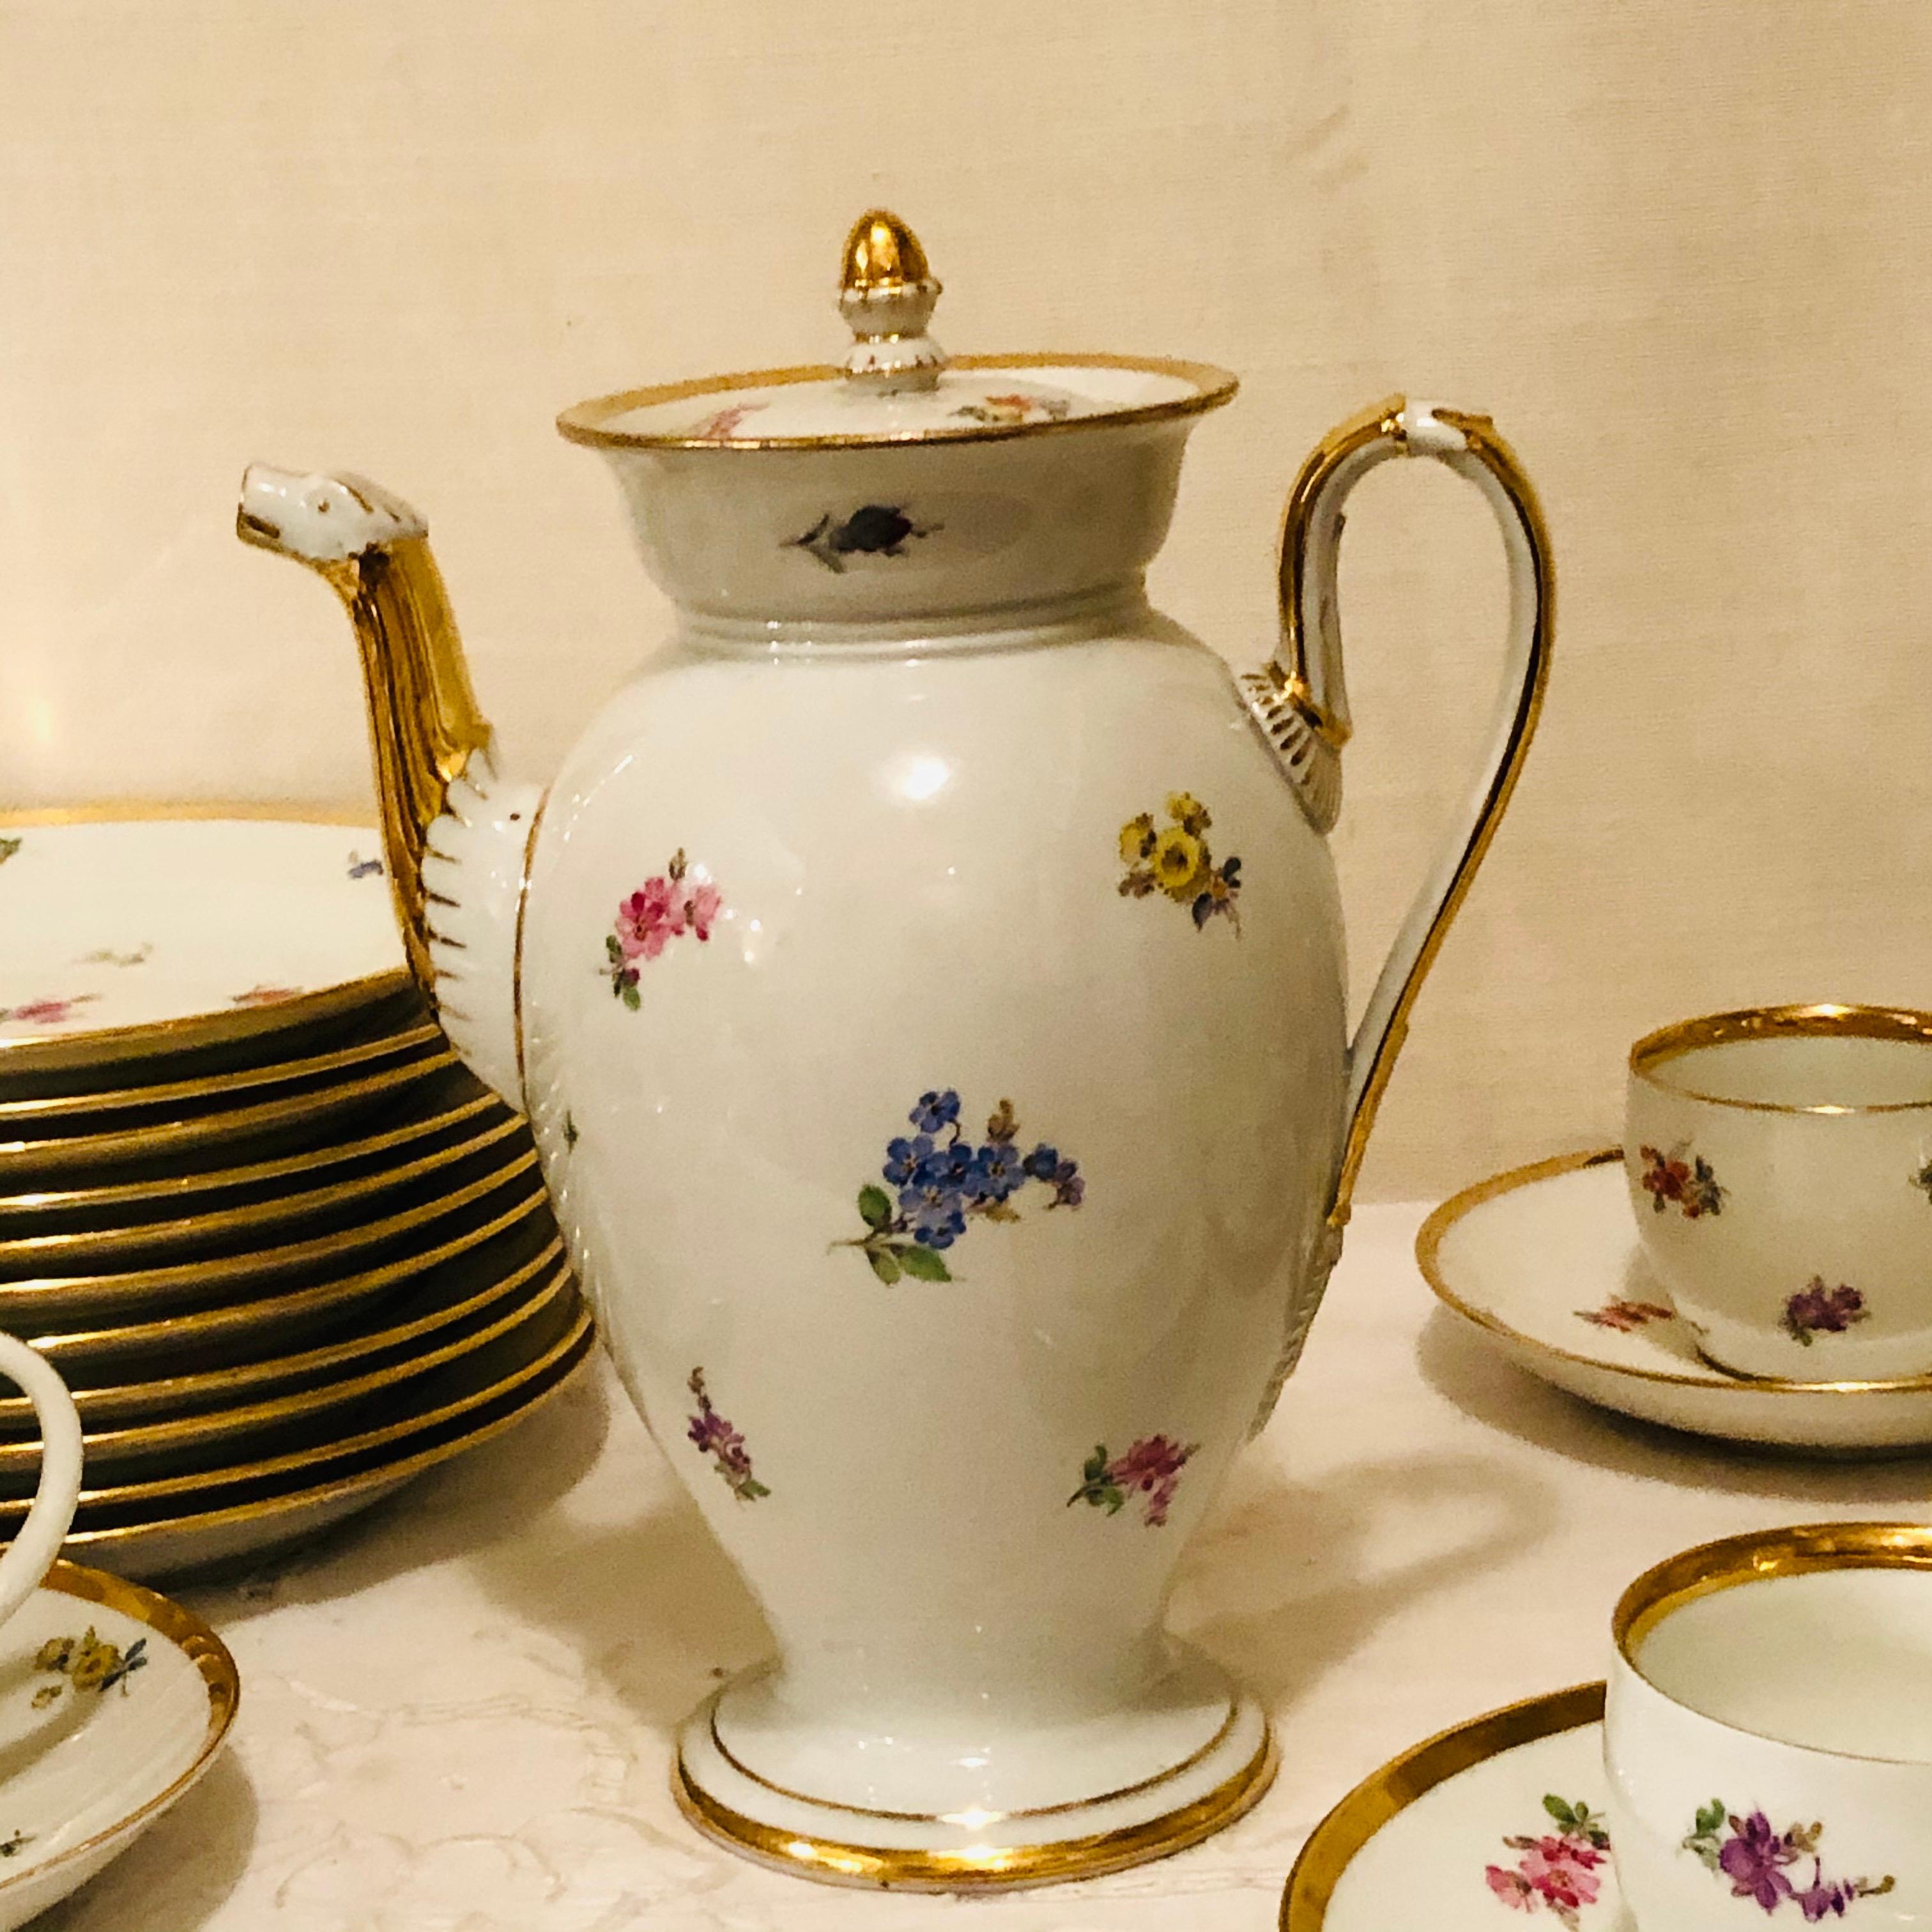 This is a wonderful Meissen streublumen tea set with 10 teacups and saucers, 10 cake plates and a teapot. The cups have enchanting animal handles and the teapot has an animal spout. All the pieces have thick gold borders. Streublumen means thrown or